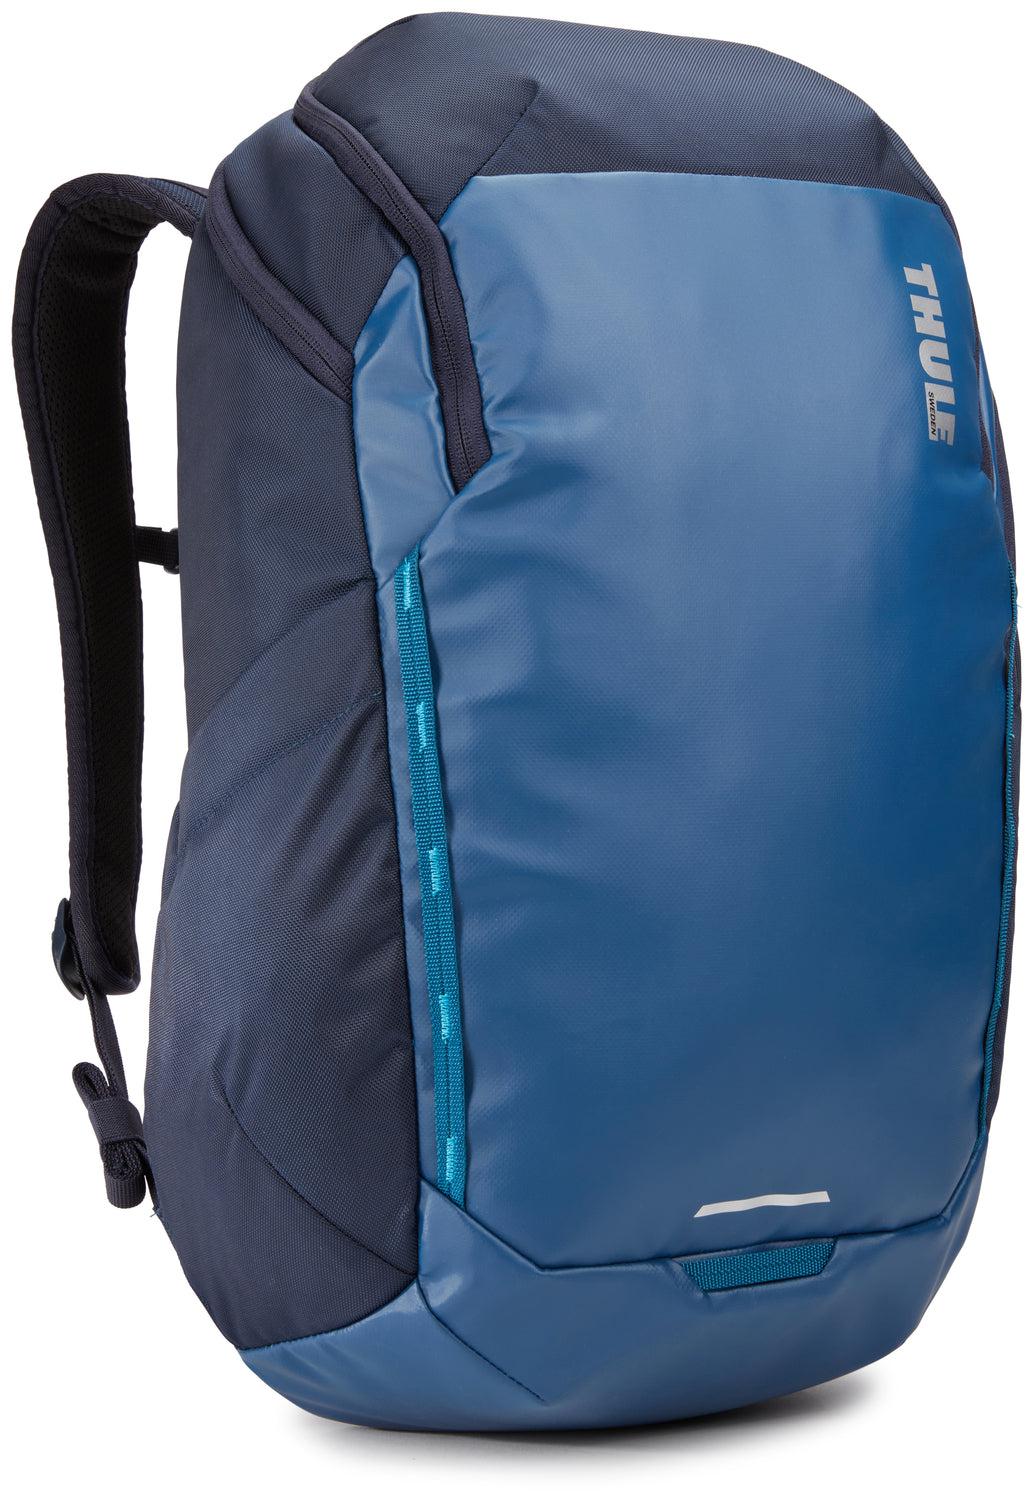 Thule Luggage Chasm Backpack 26L – Luggage Pros